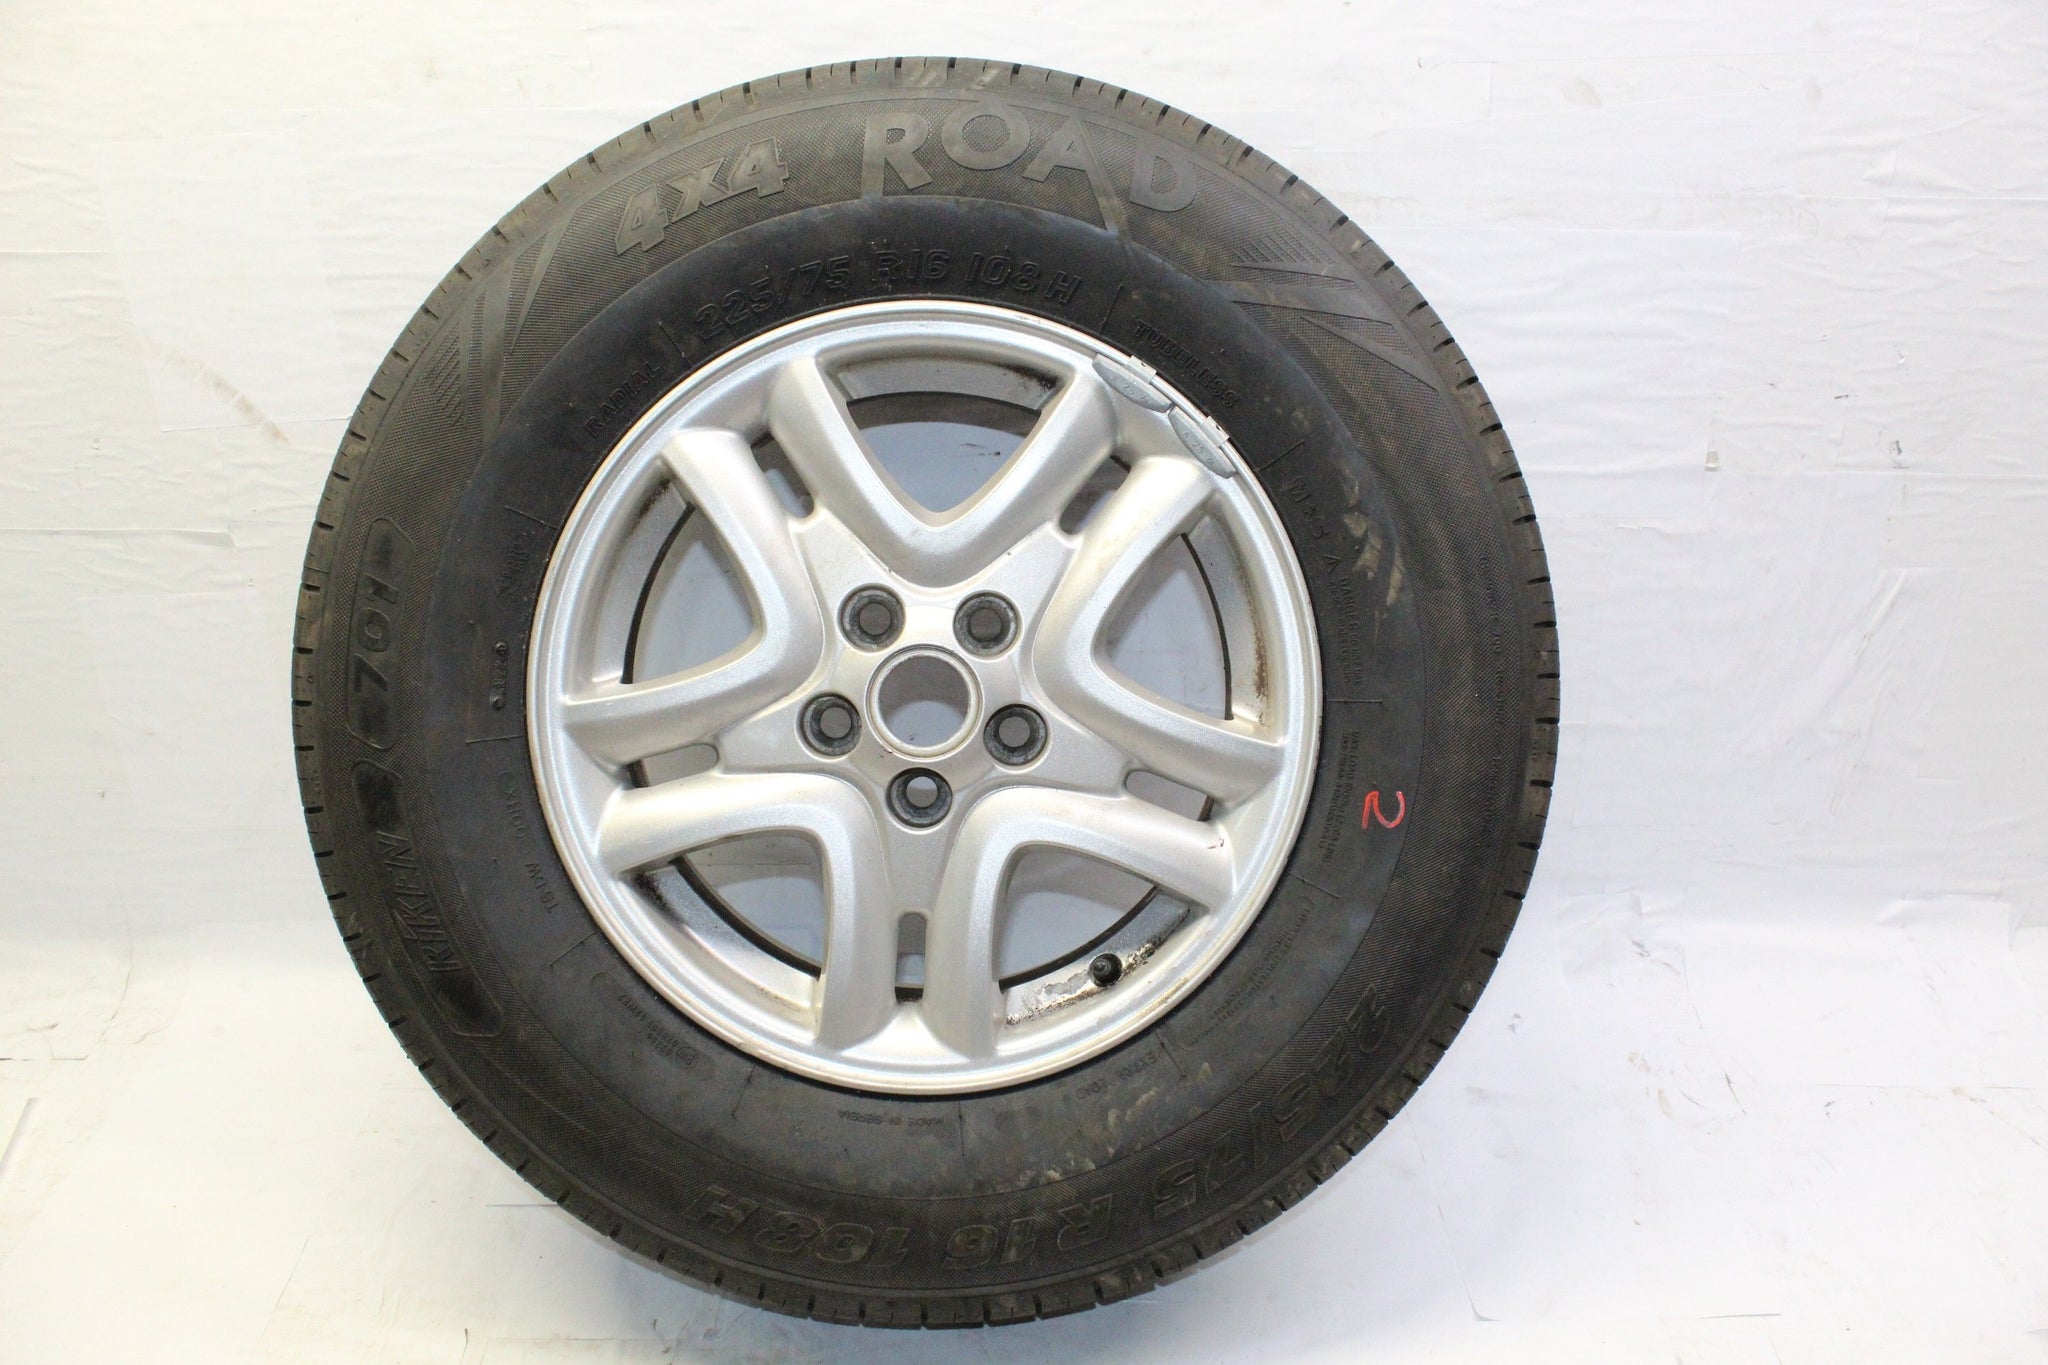 2007 Land Rover Freelander 2 ALLOY WHEEL WITH TYRE 225 / 75 R16 8.6MM